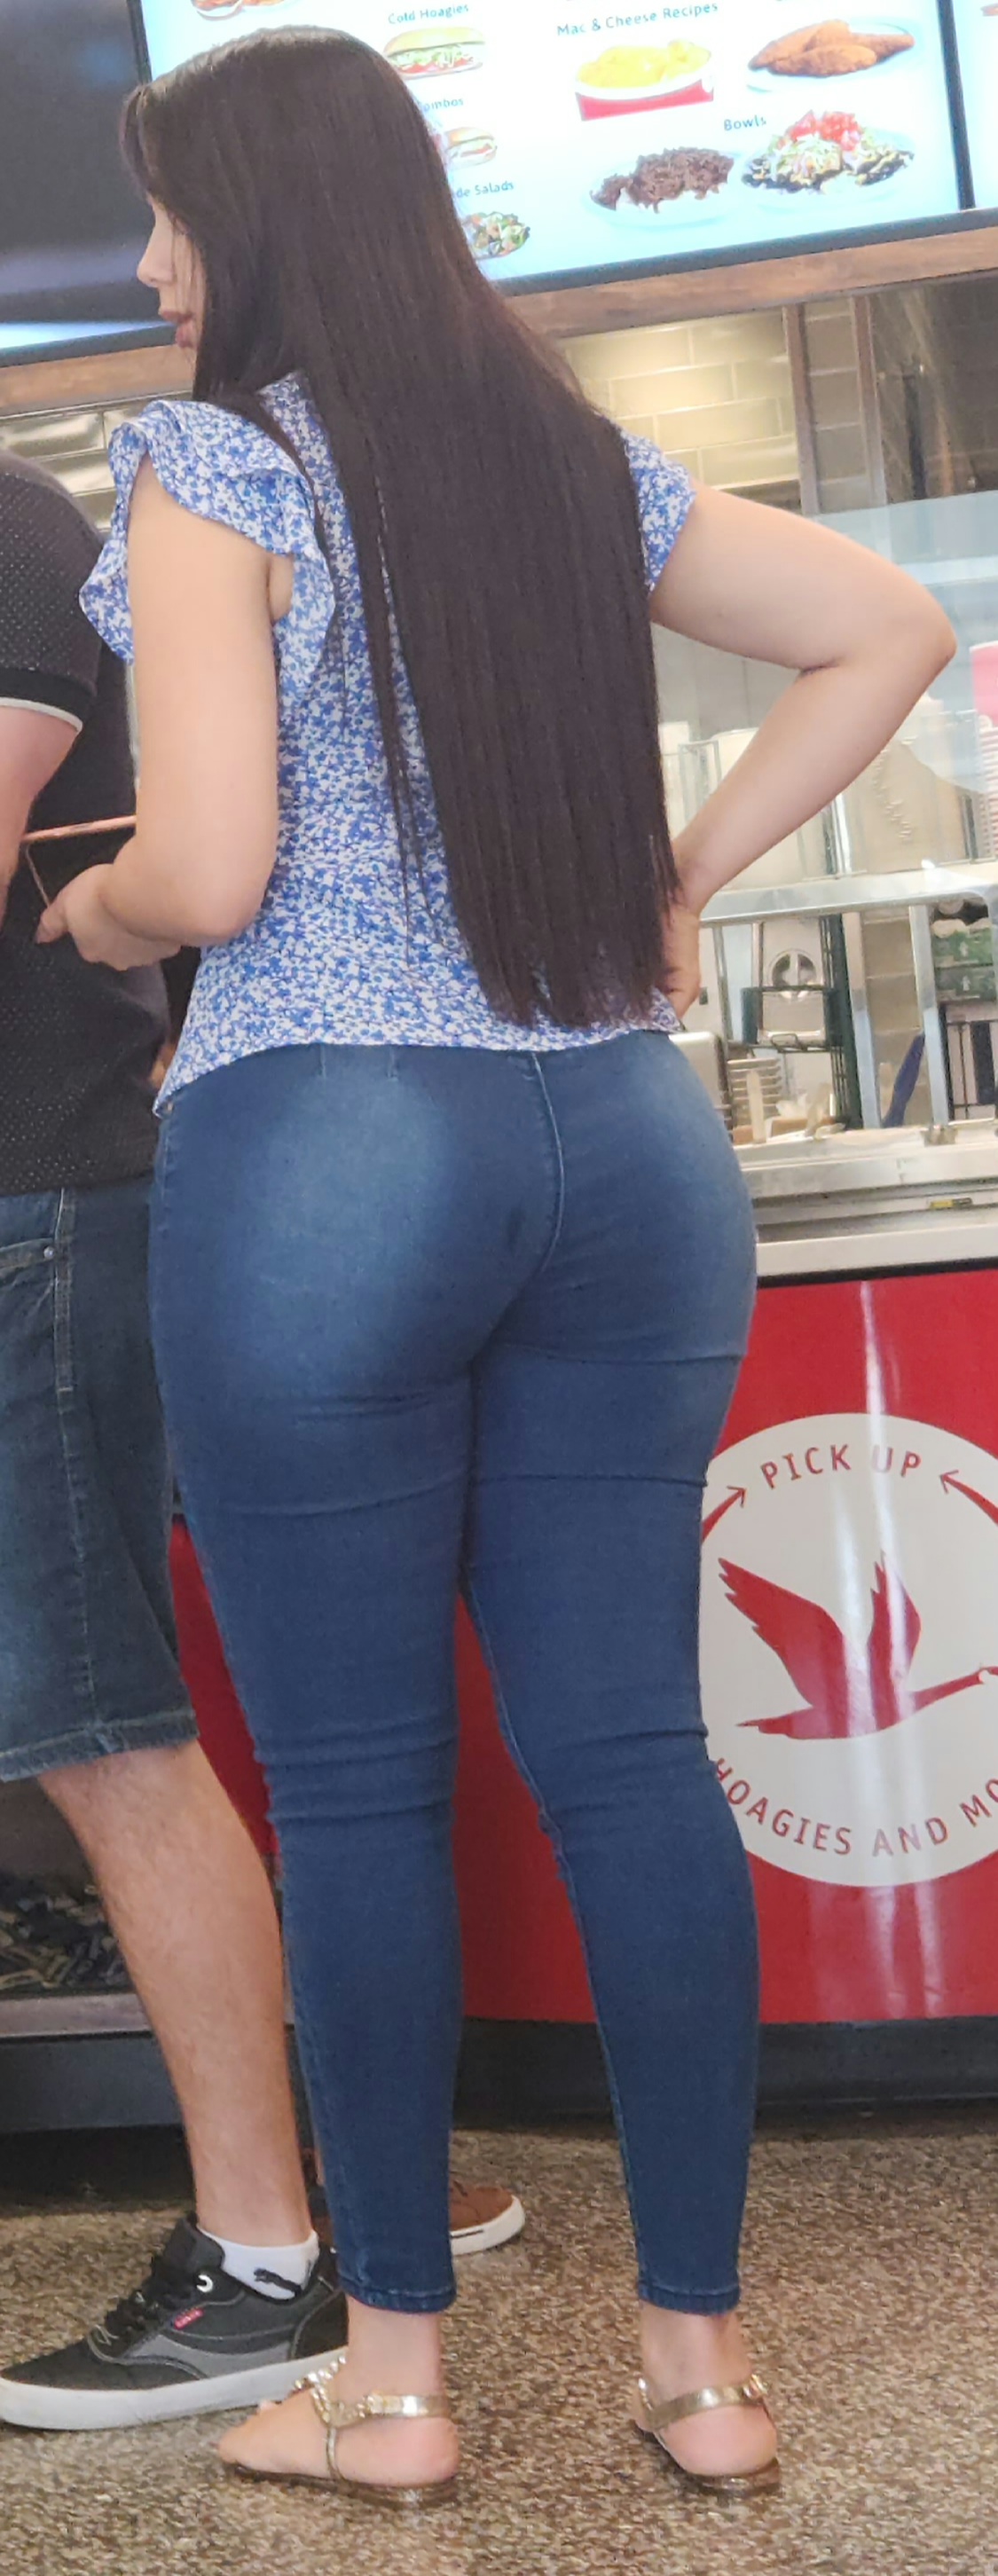 Wide hips candid